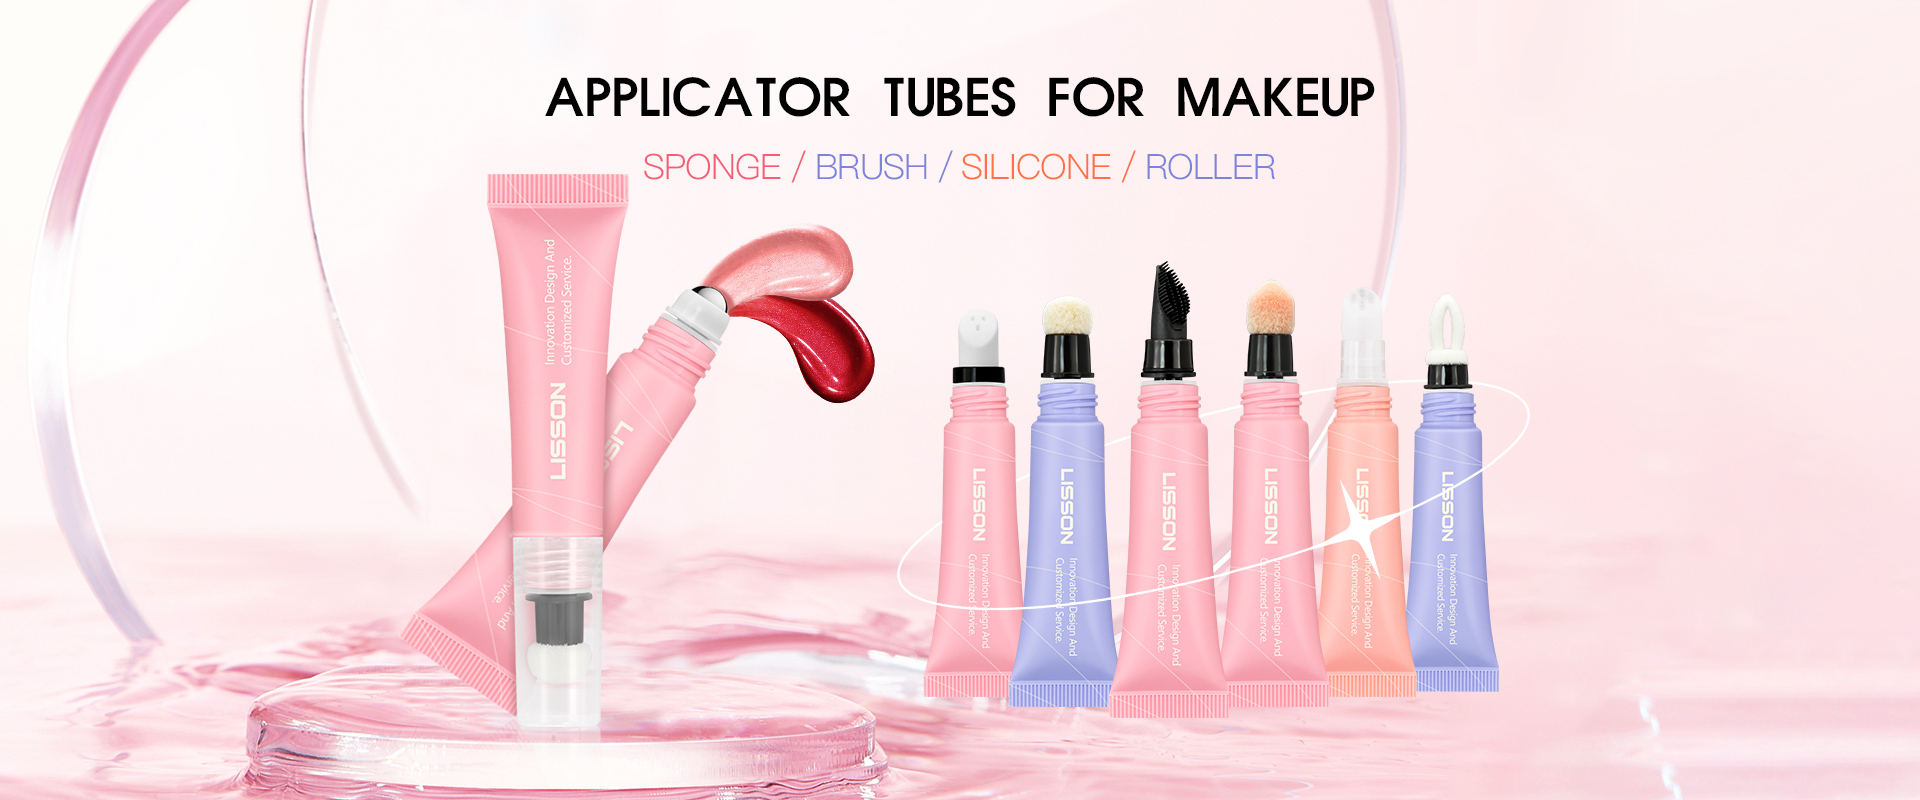 Cosmetic tube with applicators